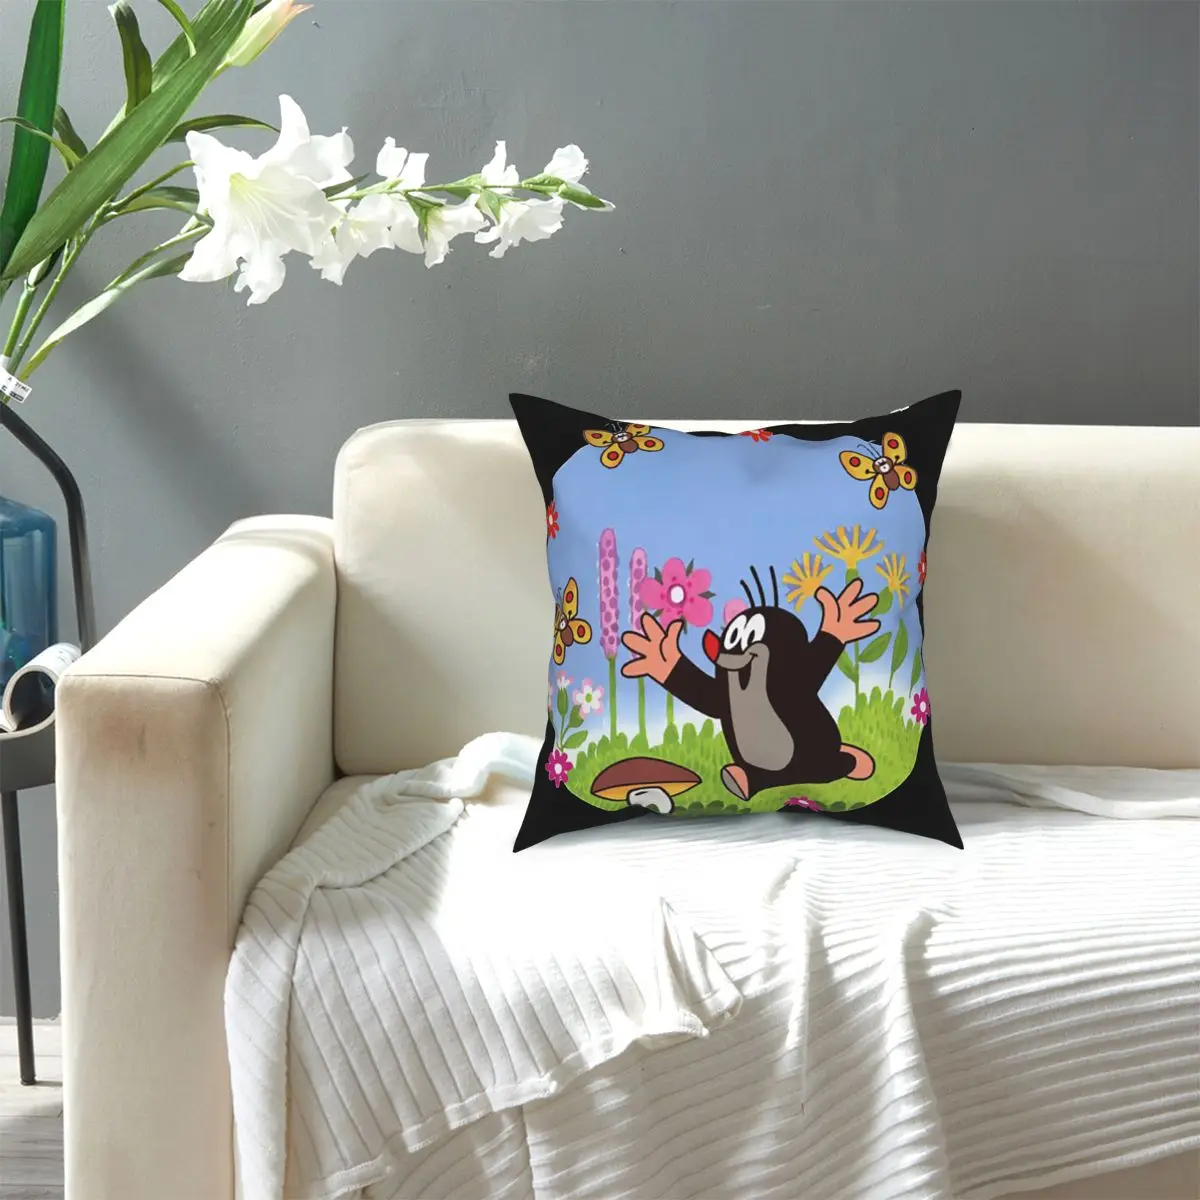 The Little Mole Krtek Cute Pillowcase Decoration Little Maulwurf Cushion Cover Throw Pillow for Living Room Double-sided Print images - 6